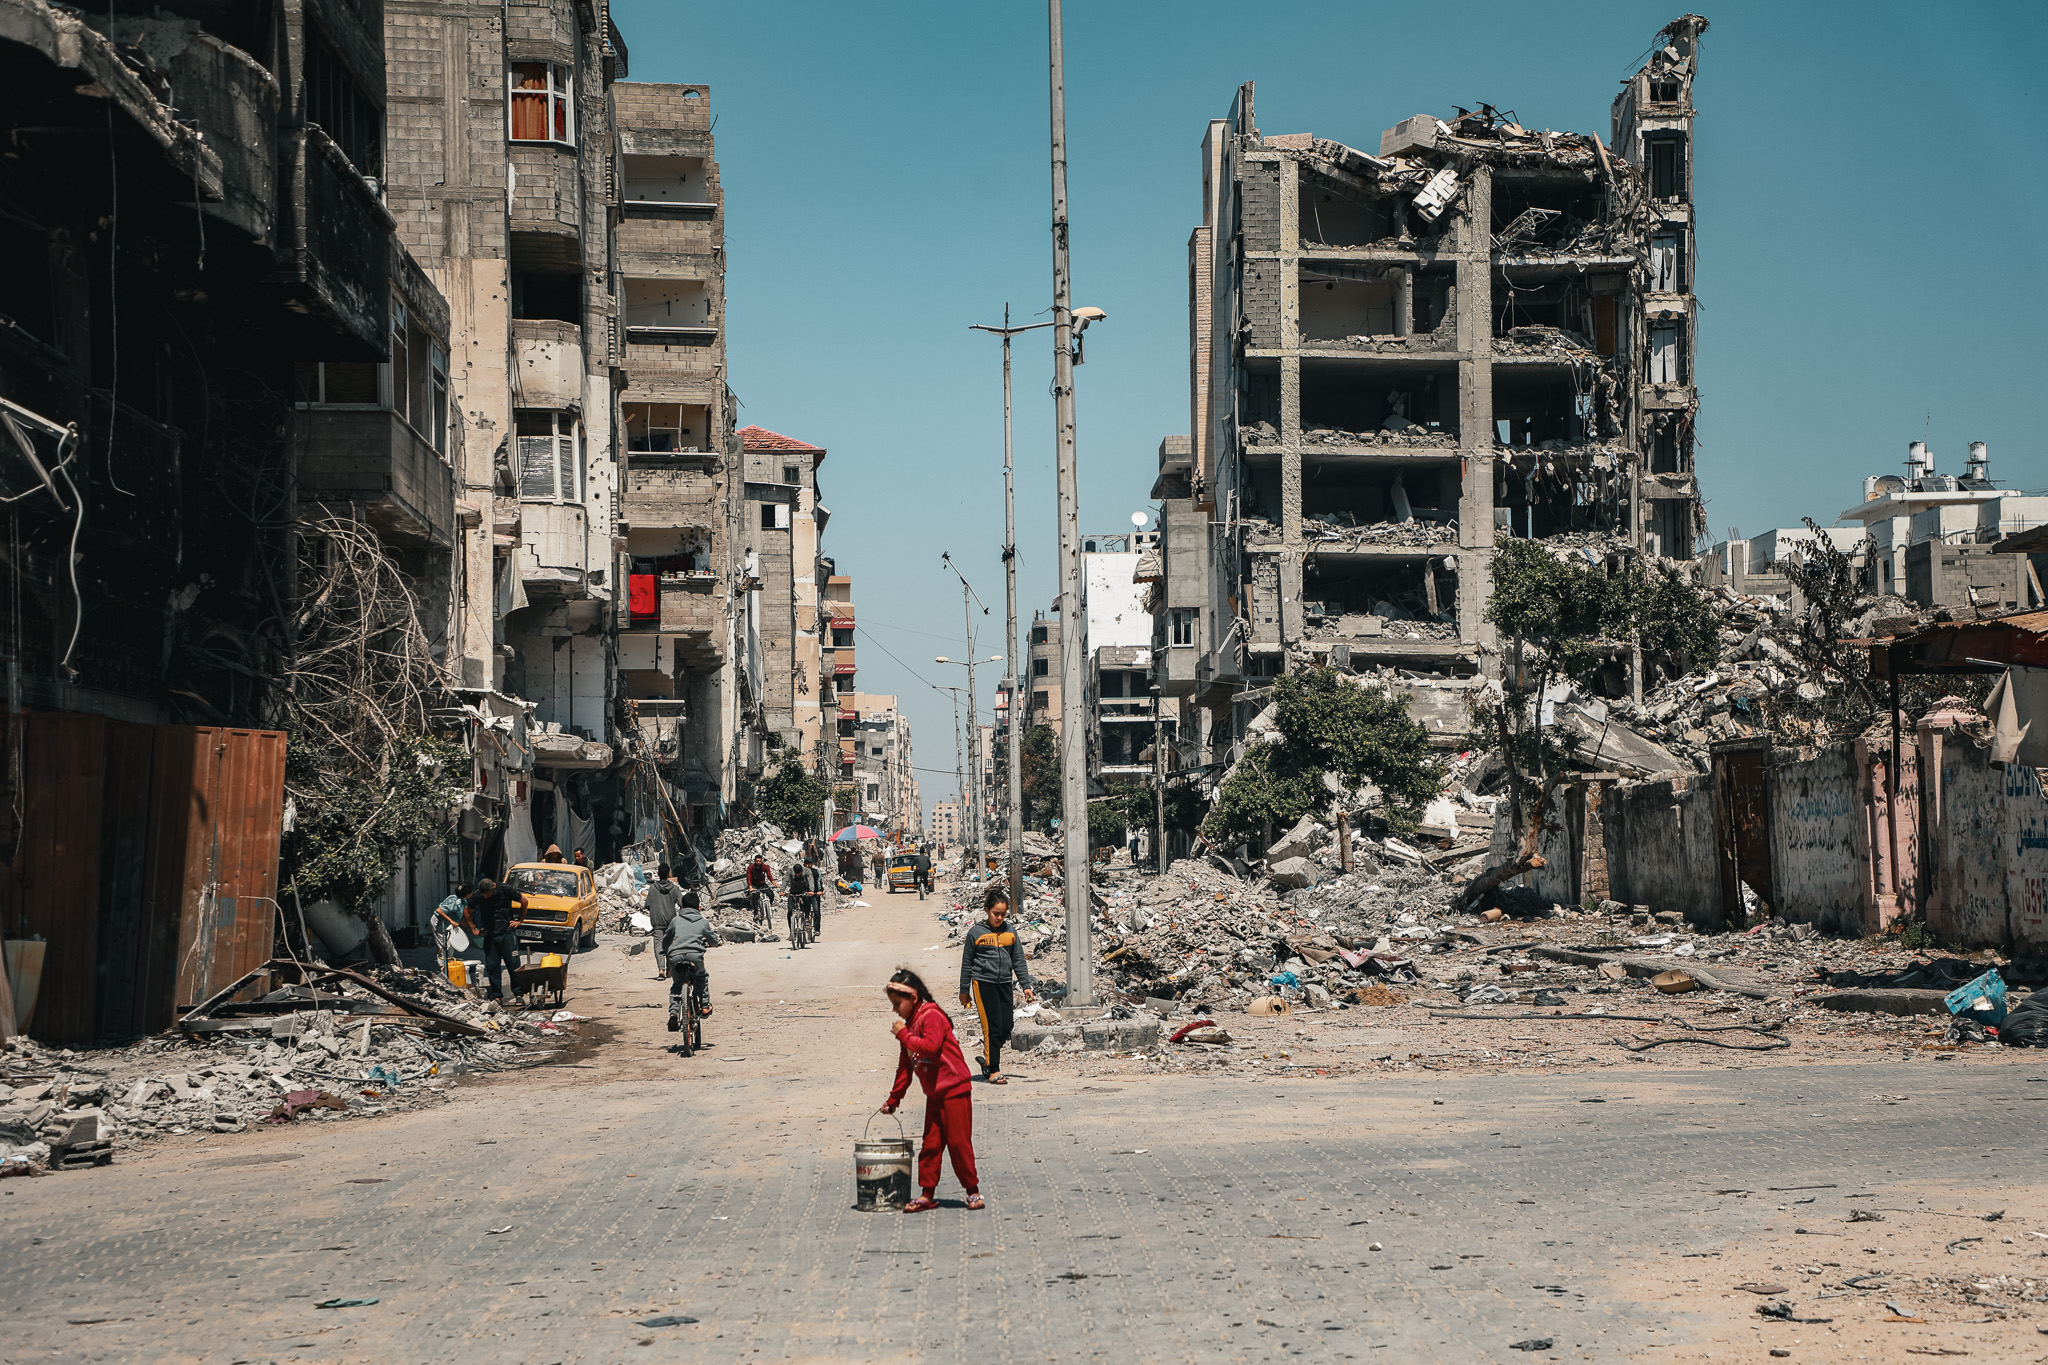 Street view from a Gaza in ruins